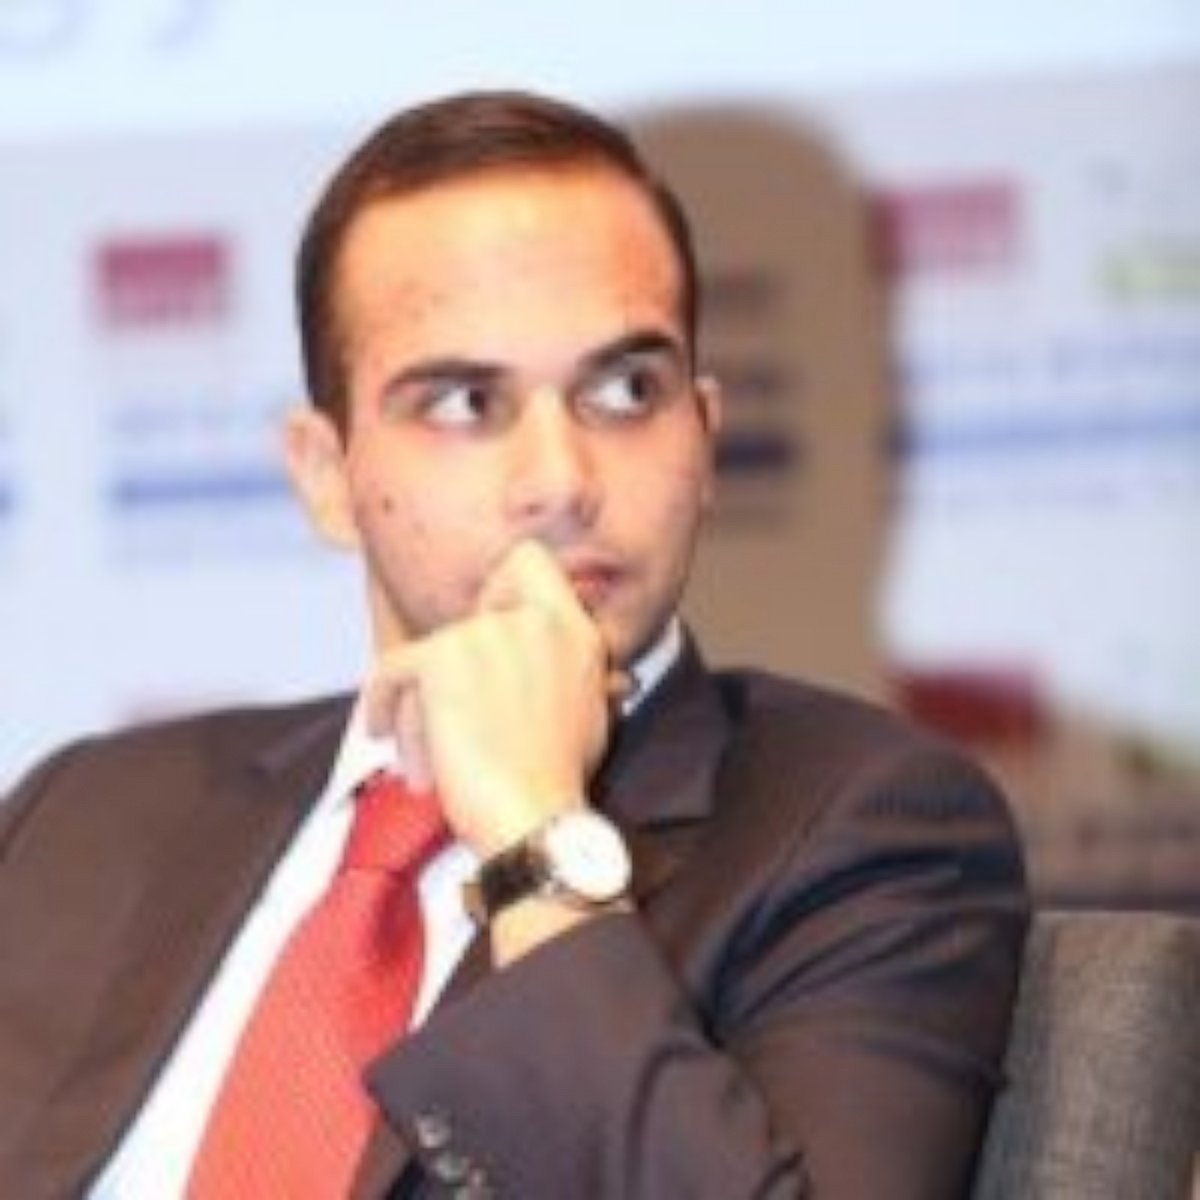 PHOTO: George Papadopoulos, a Trump campaign foreign policy adviser, is seen in an undated image posted to LinkedIn.